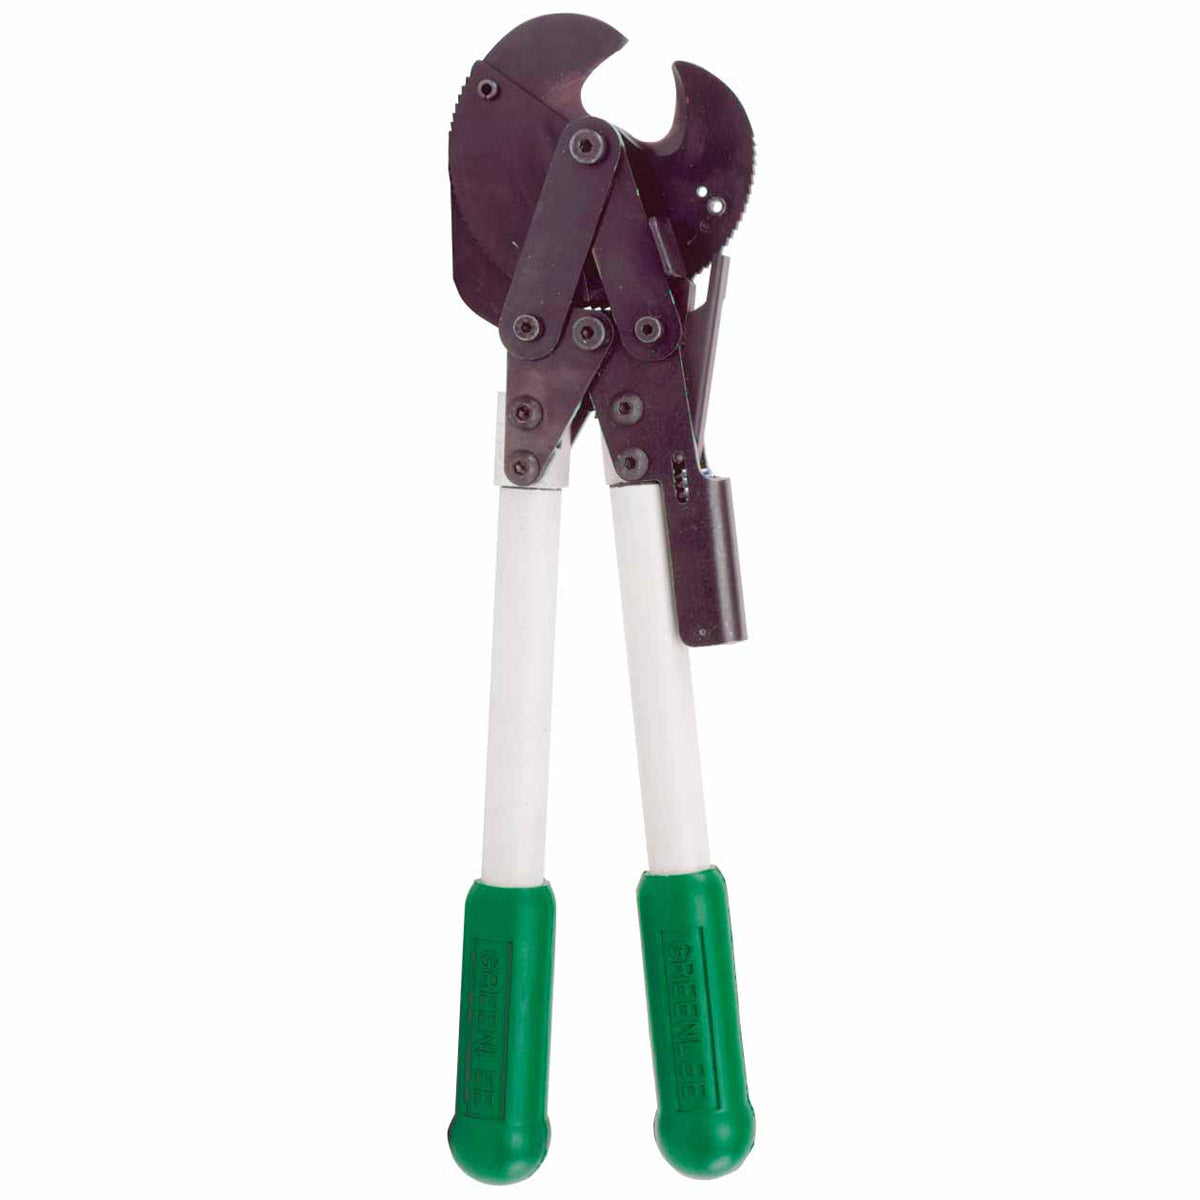 Greenlee 774 High Performance Ratchet Cable Cutters